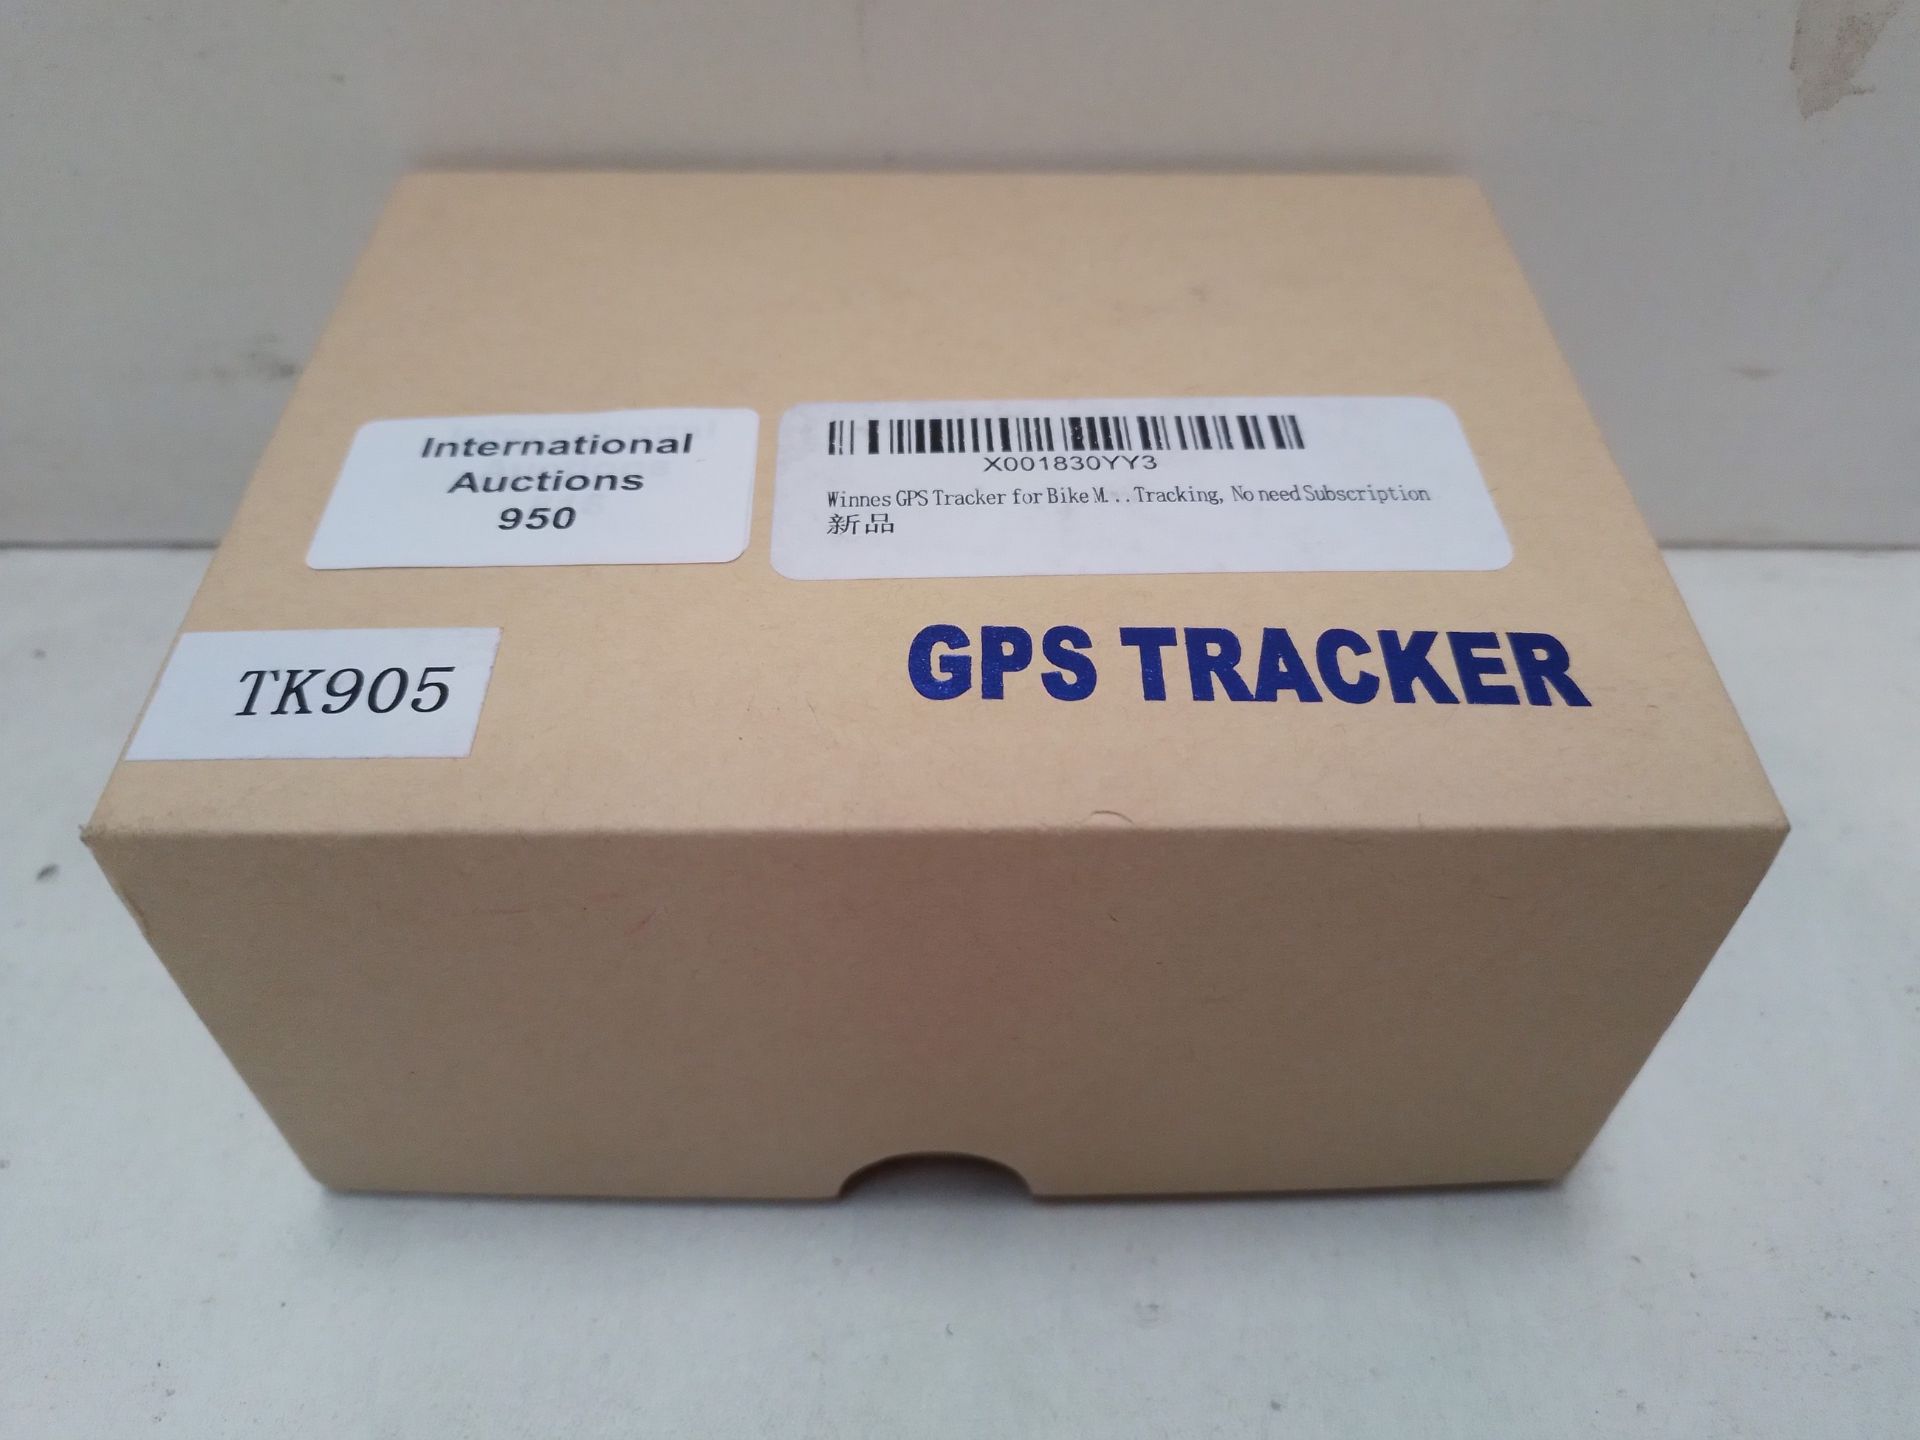 RRP £42.98 Winnes GPS Tracker for Bike Motorcycle Real-time Location - Image 2 of 2